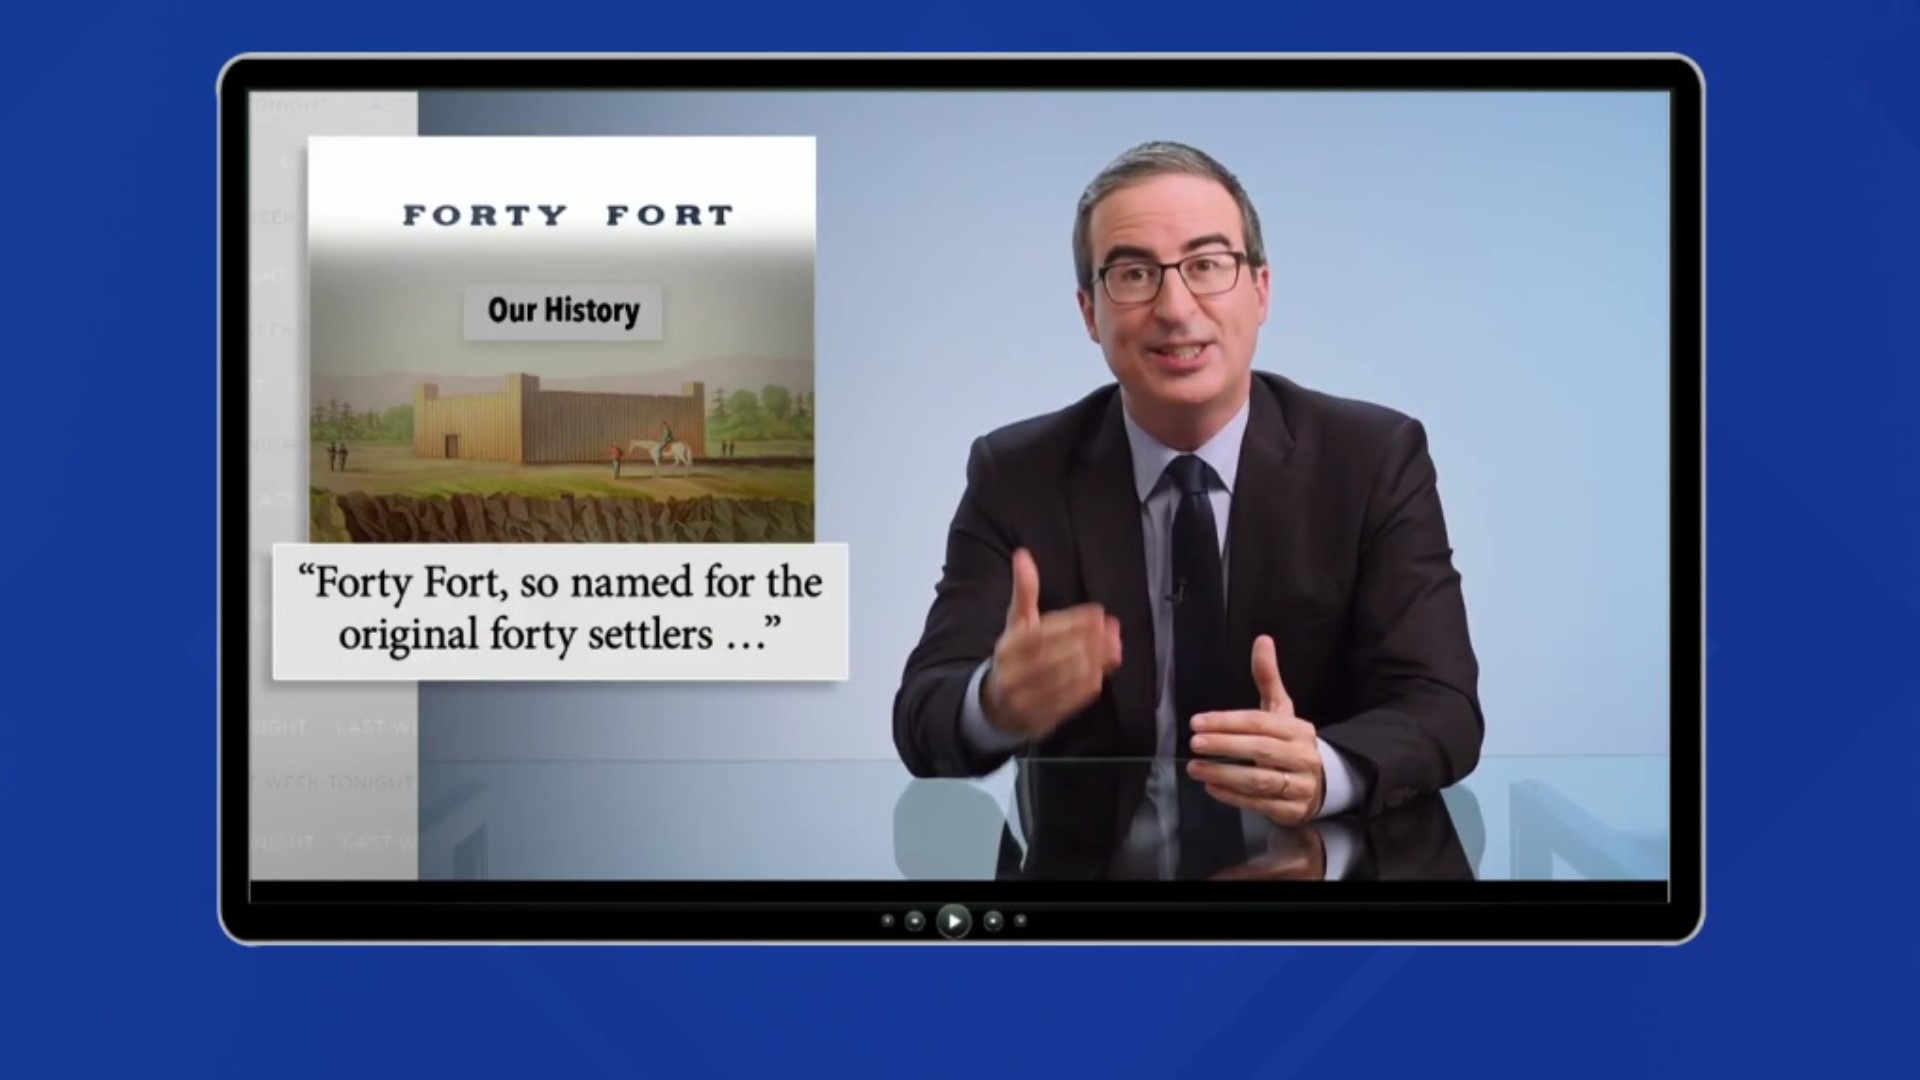 WNEP and Northeastern Pennsylvania were once again featured on HBO's Last Week Tonight with John Oliver over the weekend.